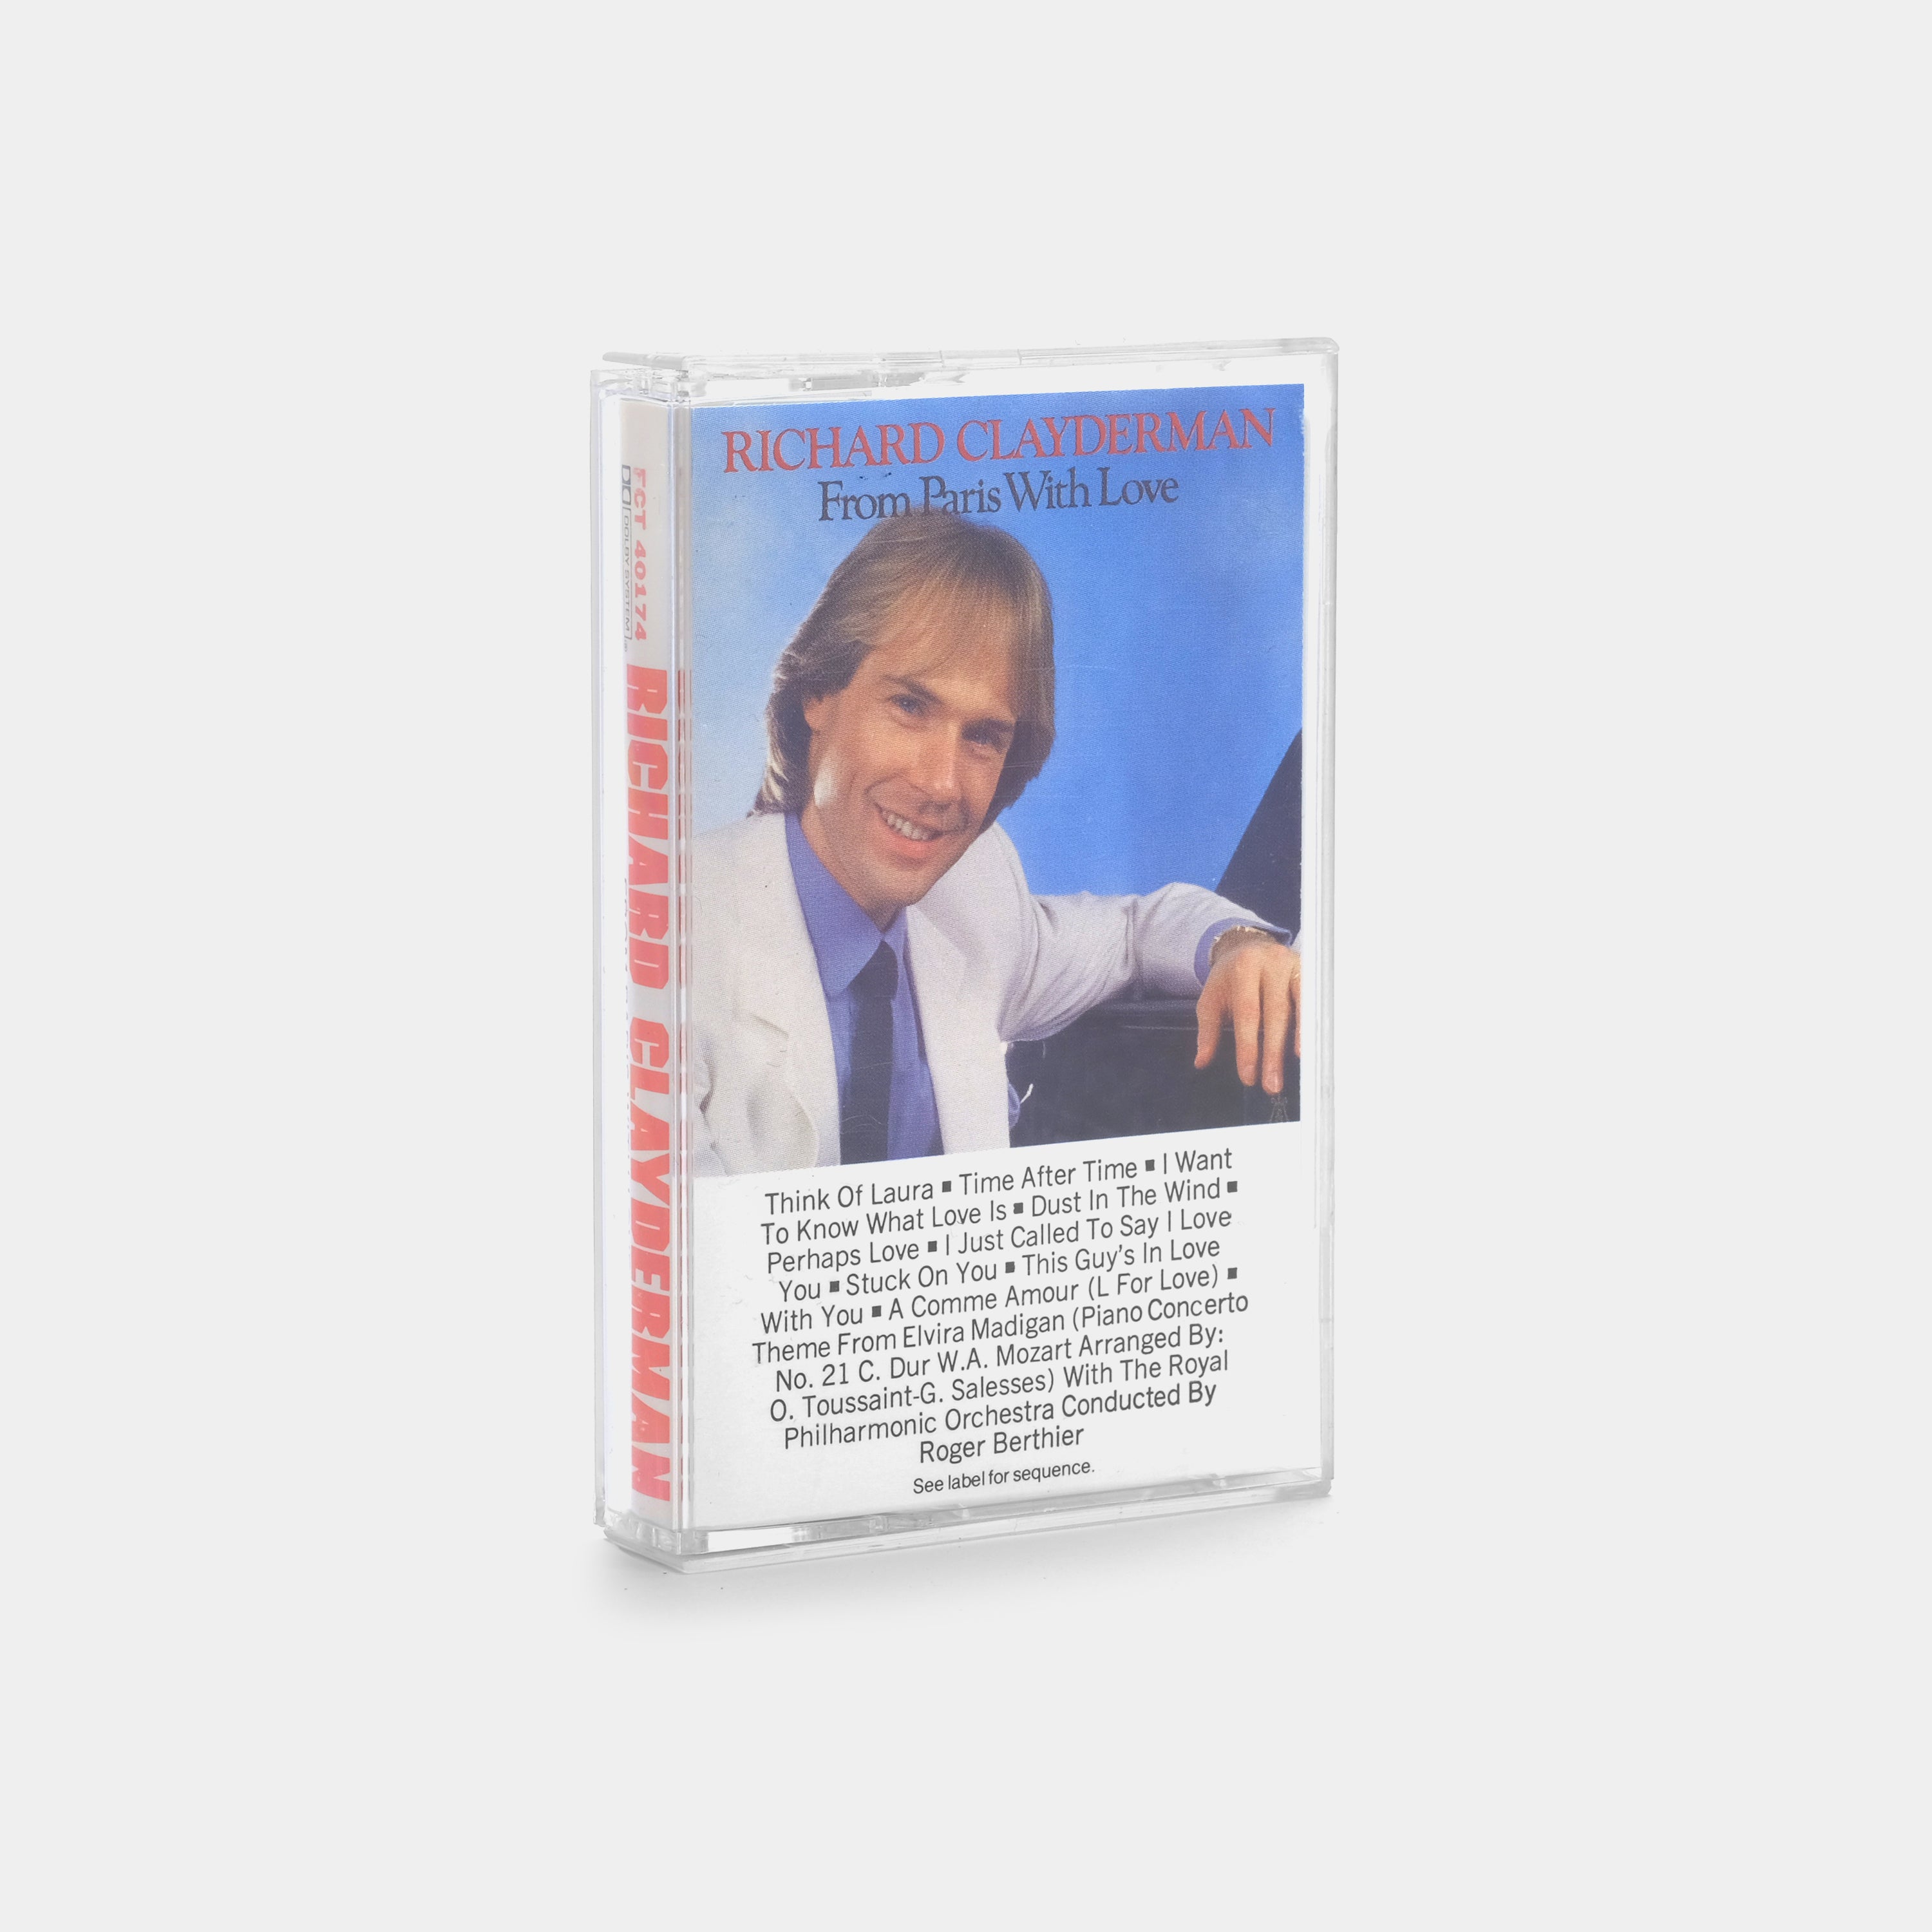 Richard Clayderman - From Paris With Love Cassette Tape